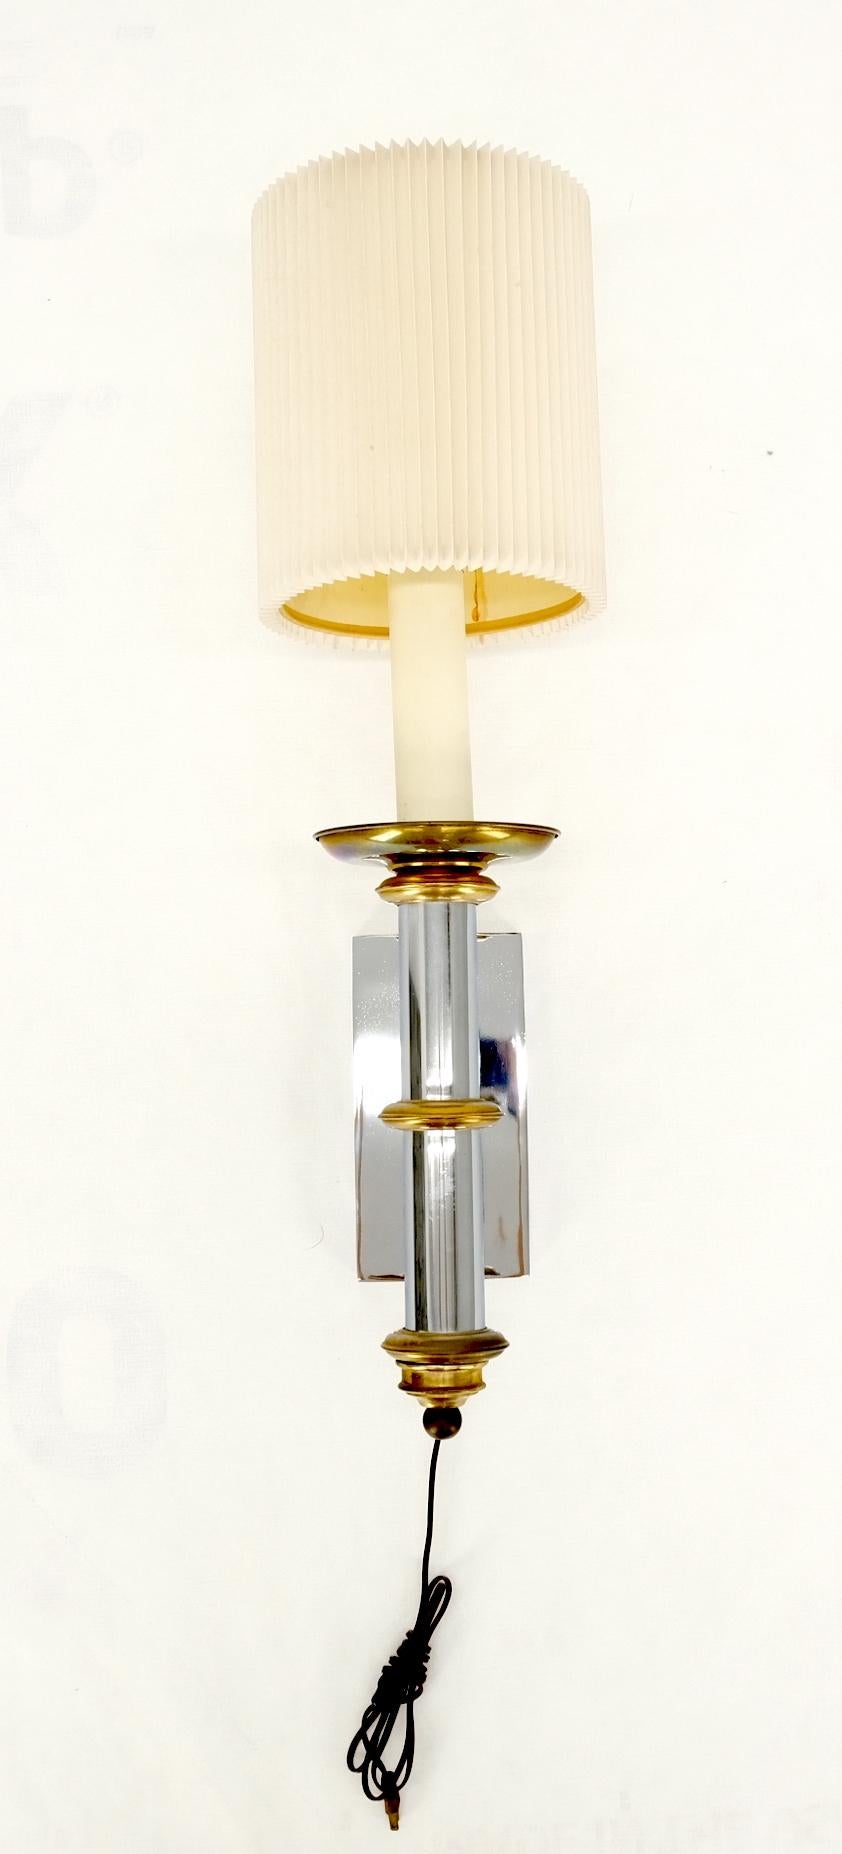 Fine Chrome Brass Mid Century Modern Sconce Light Fixture Lamp In Good Condition For Sale In Rockaway, NJ